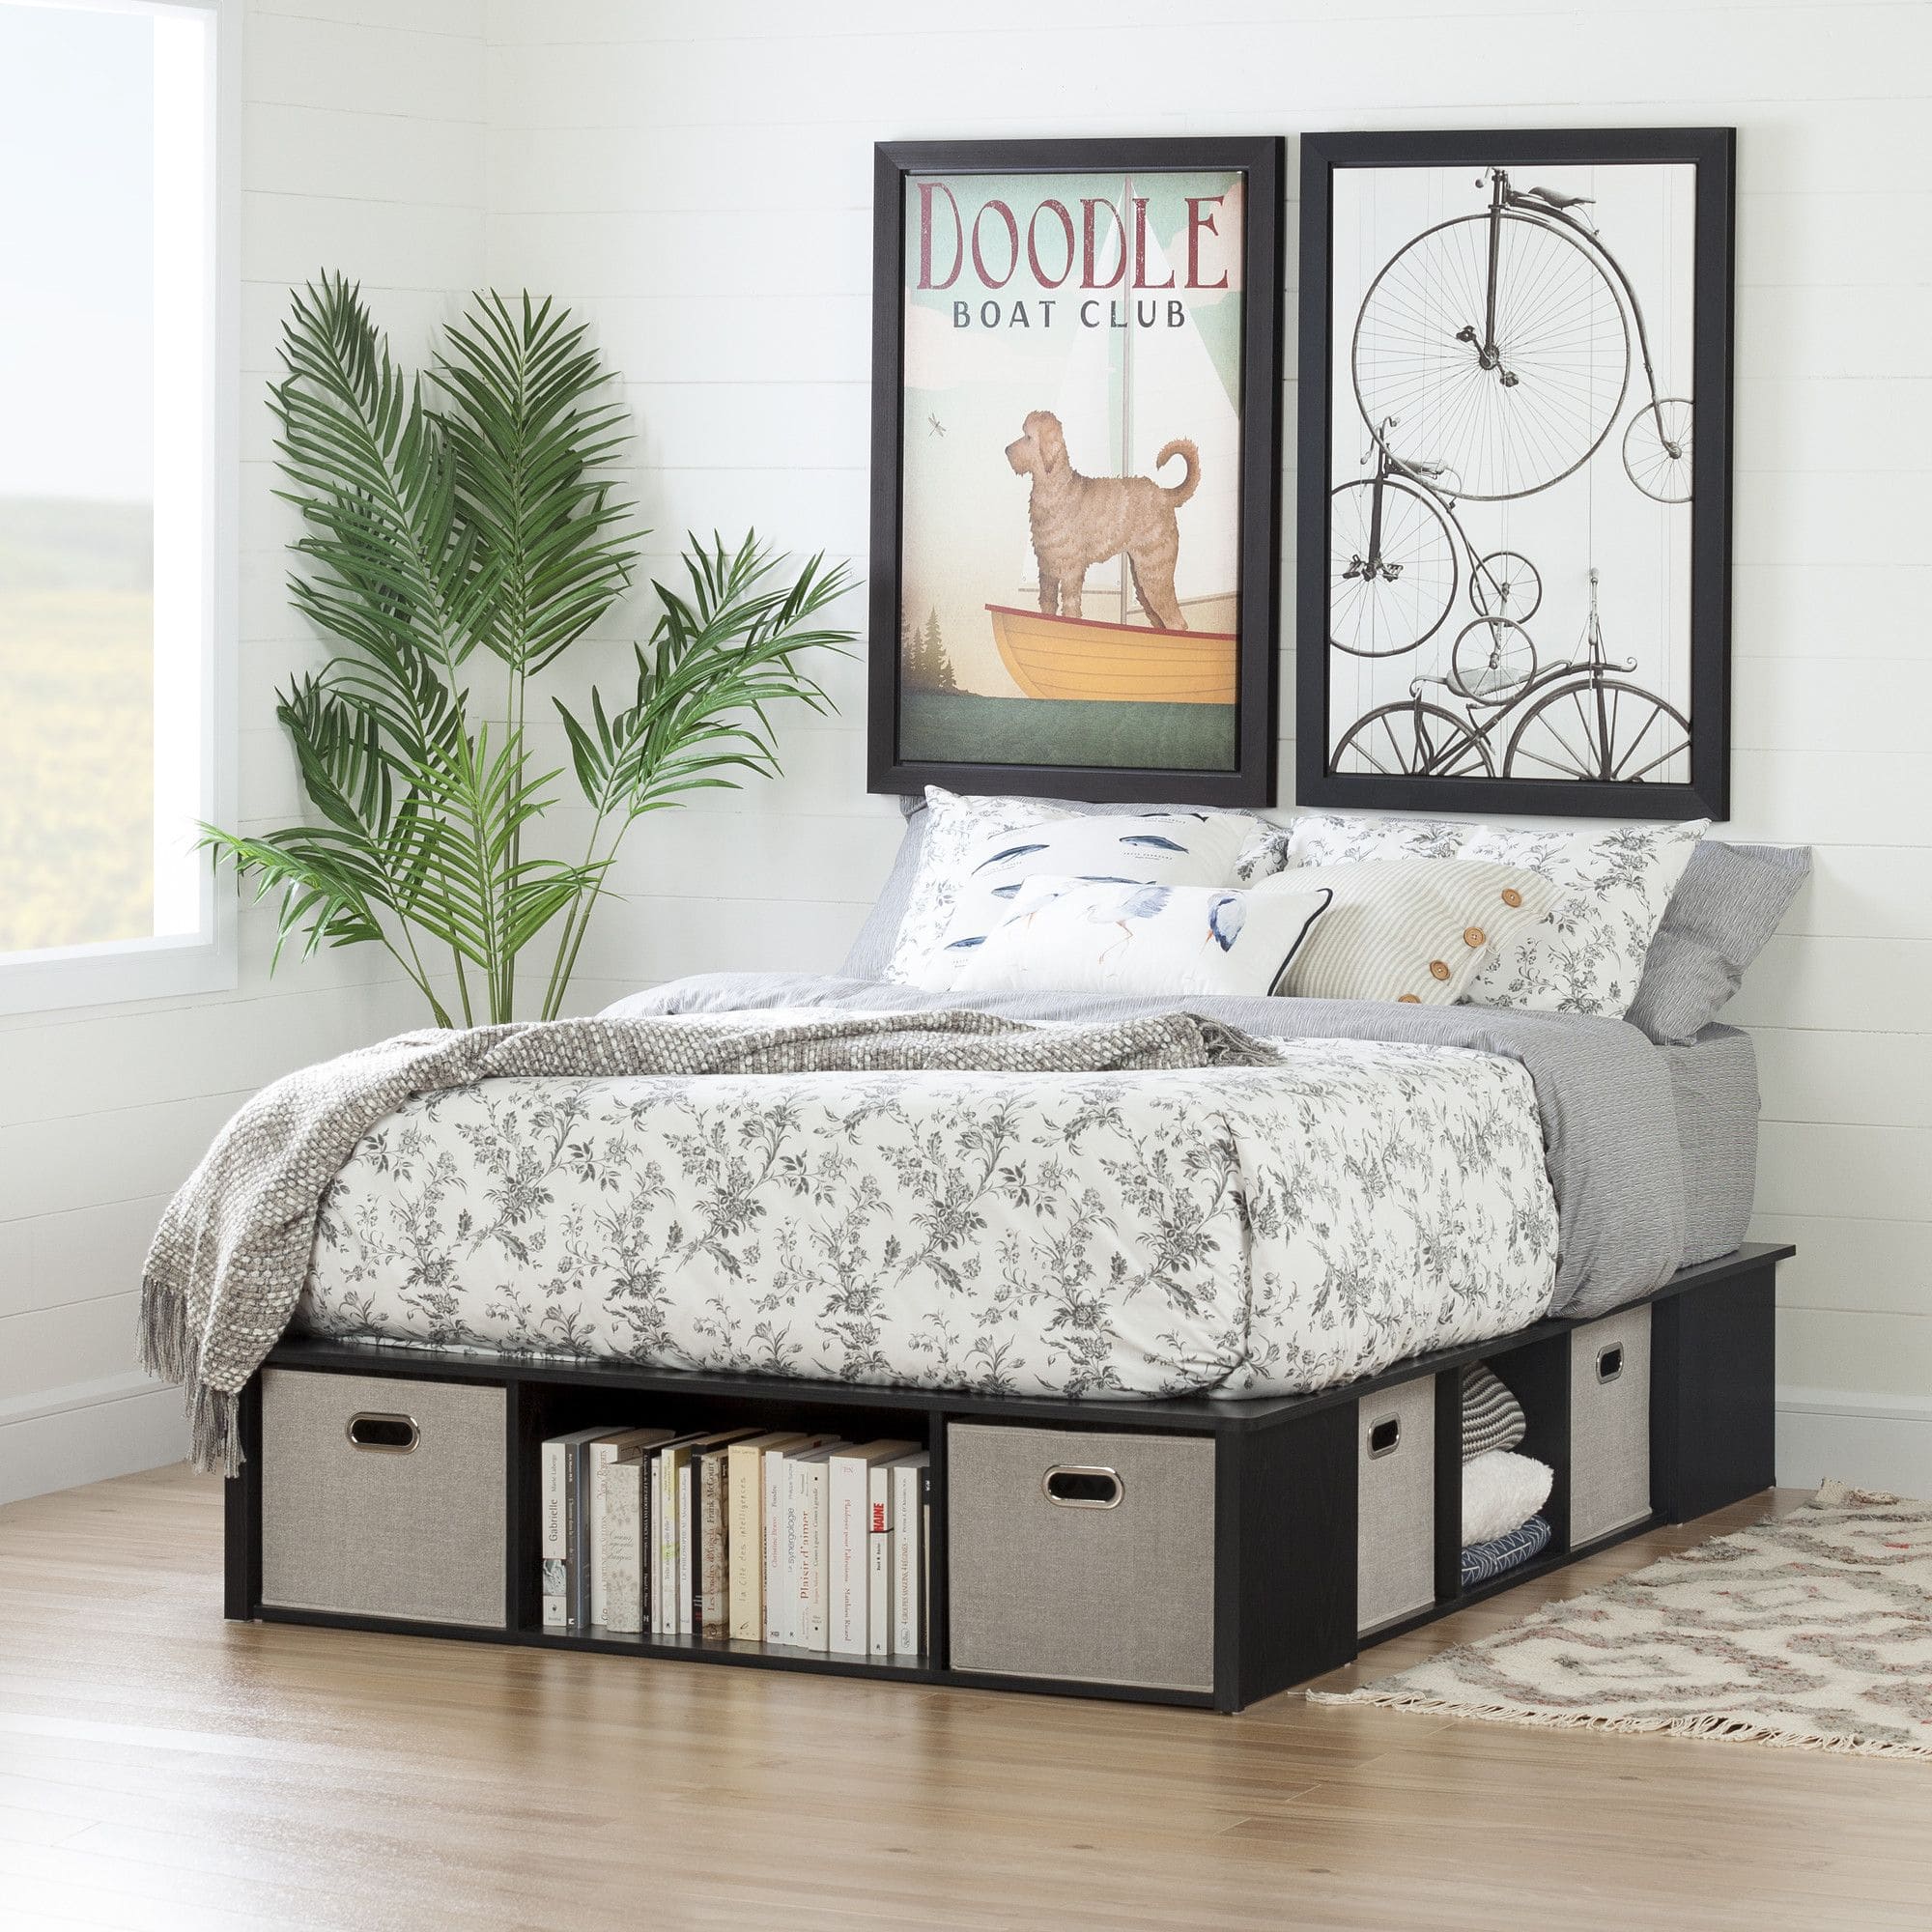 23 creative storage bed ideas to add to your bag - 169